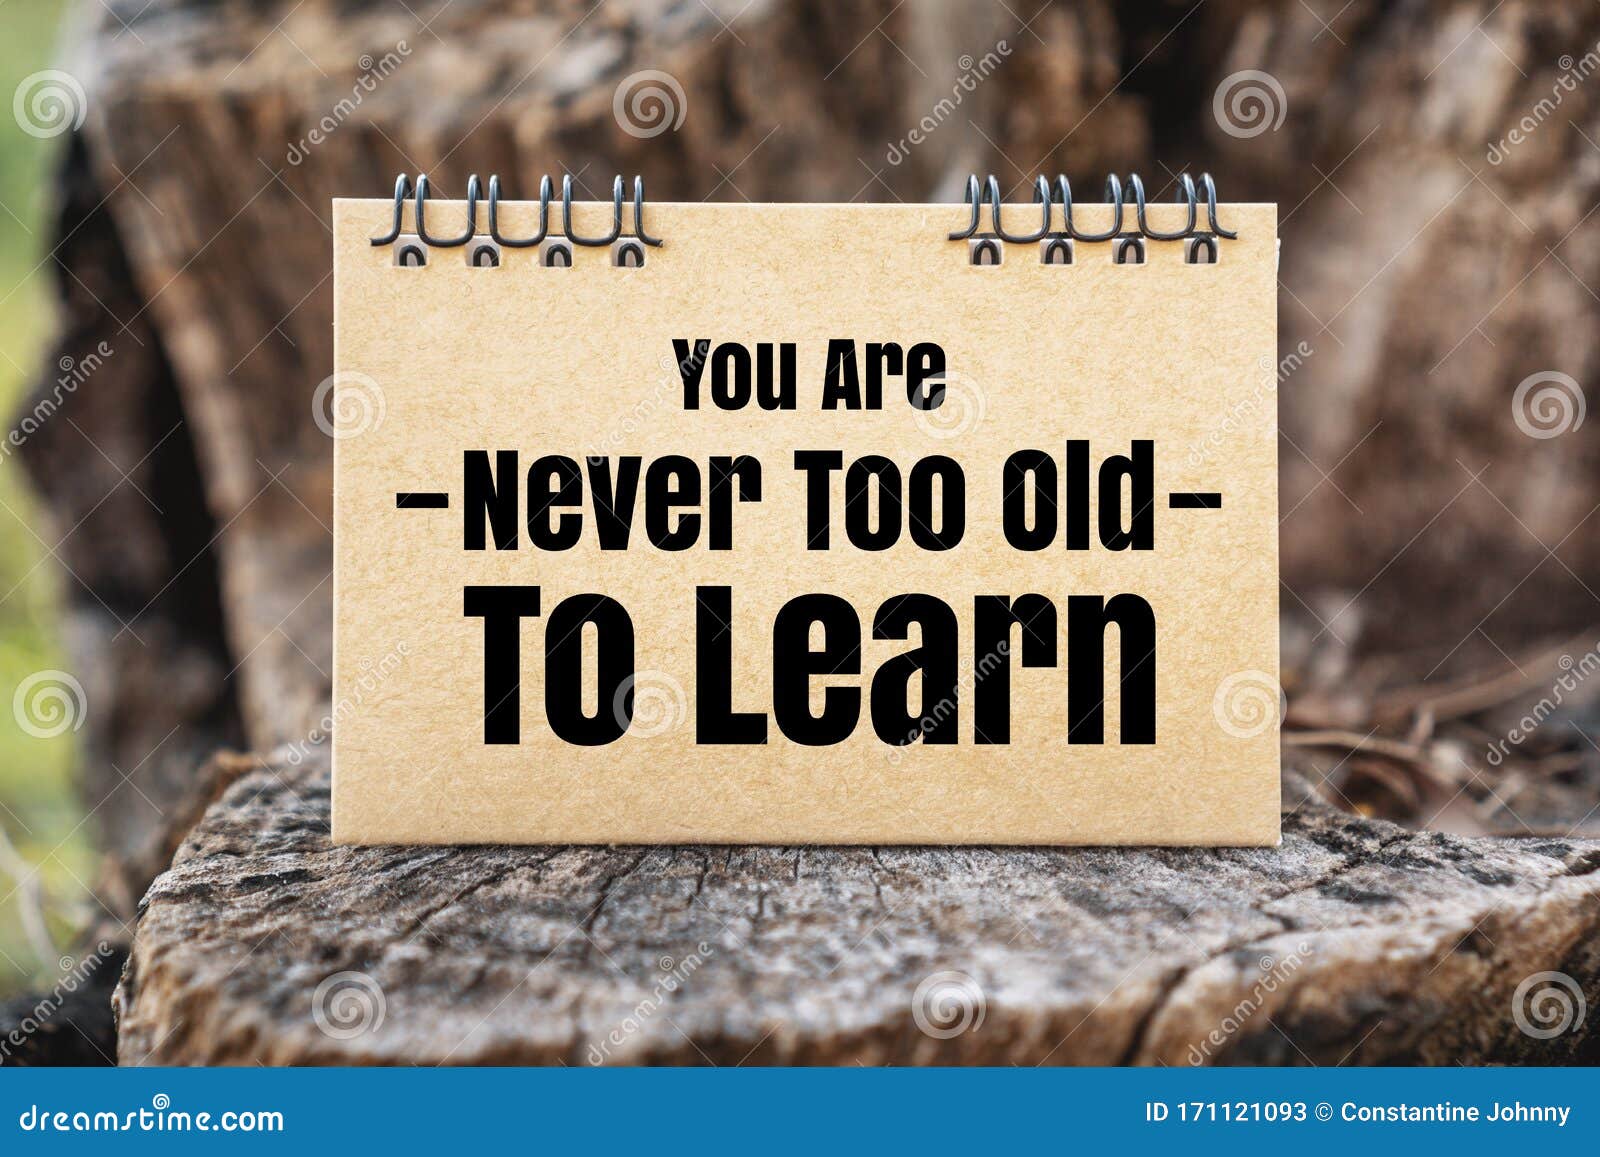 You Never Too Old To Learn Photos - Free & Royalty-Free Stock Photos from Dreamstime